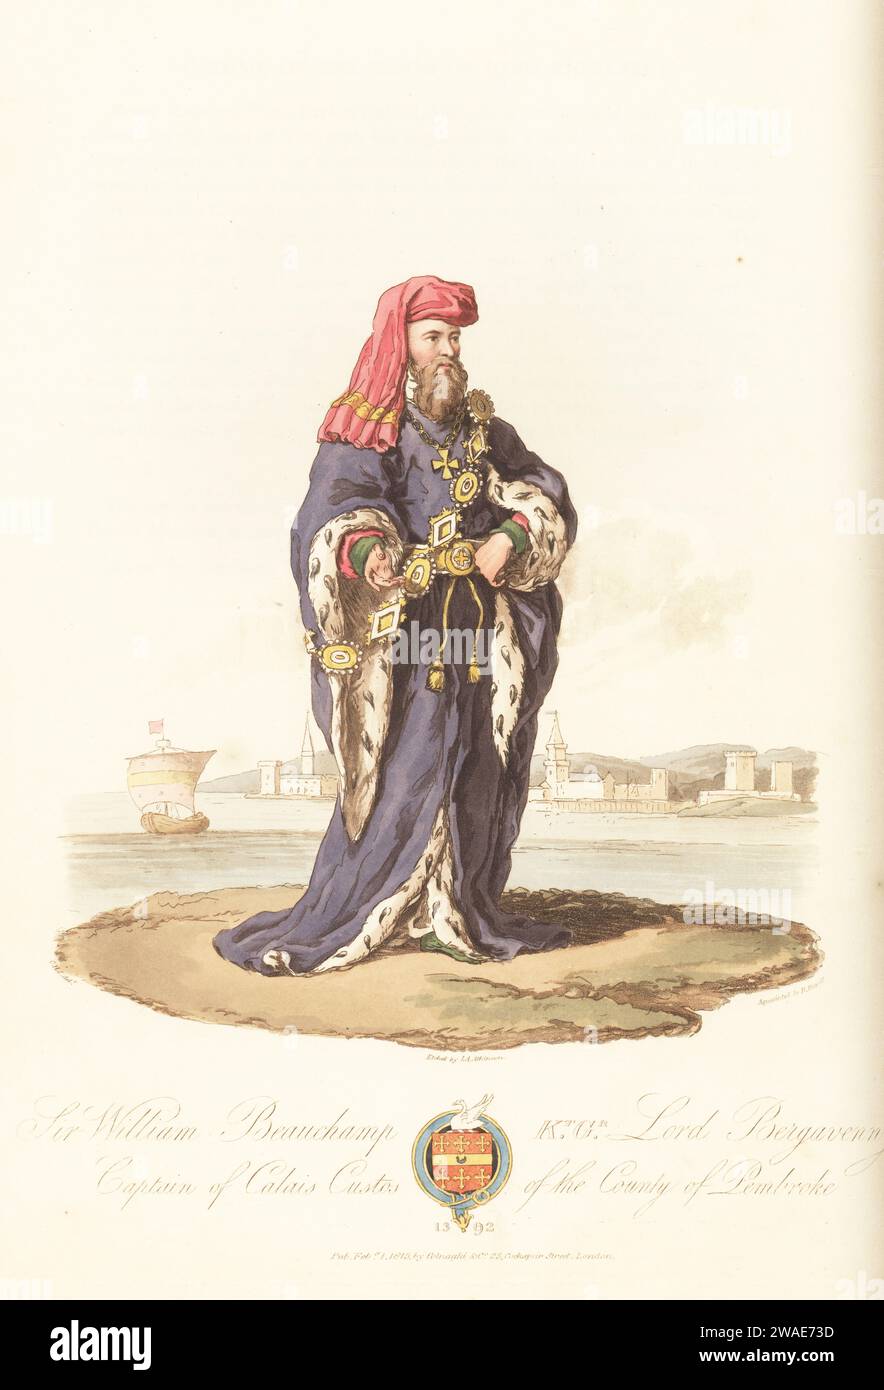 Sir William Beauchamp, Knight of the Garter, Lord Bergavenny, Captain of Calais, 1392. In state habit of crimson hood, ermine-lined purple robe, rich girdle, belt of gold and gems on his shoulder. From the stained glass in York Minster by John Thornton. View of Calais from a print by Wenceslaus Hollar. Handcoloured copperplate engraving etched by John Augustus Atkinson, aquatinted by Robert Havell, after an illustration by Charles Hamilton Smith from his own Selections of Ancient Costume of Great Britain and Ireland, Colnaghi and Co., London, 1814. Stock Photo